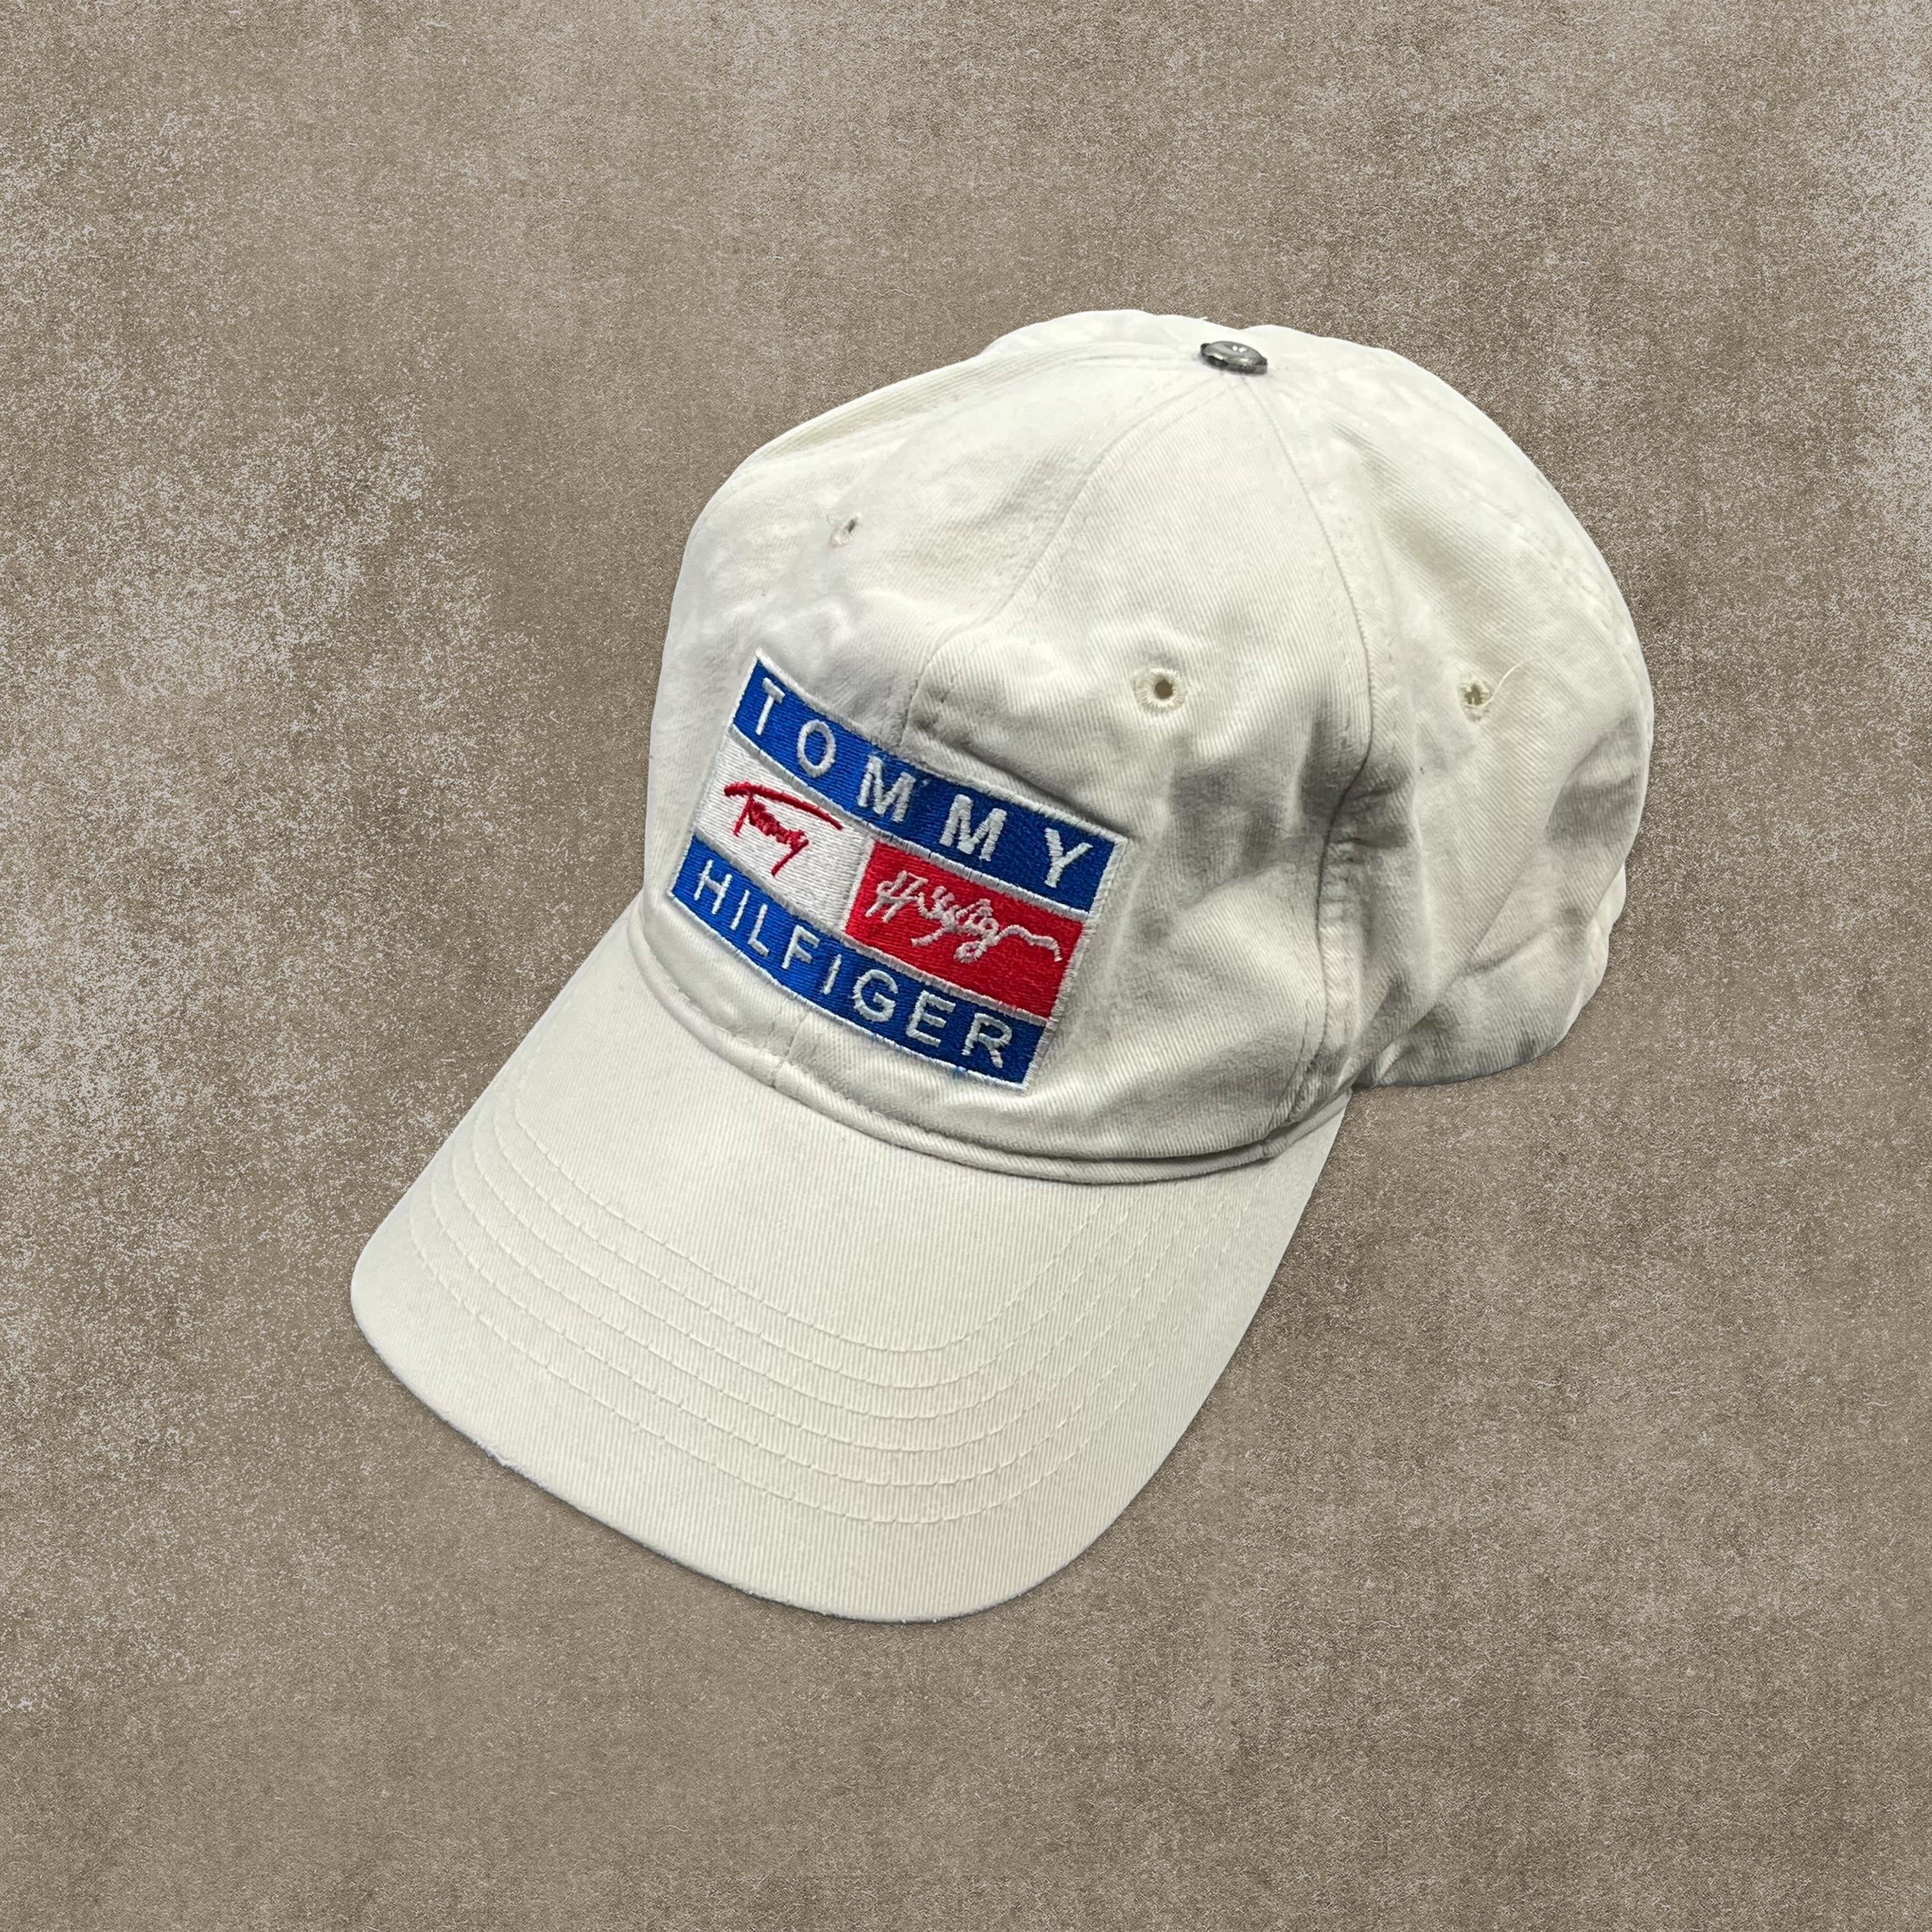 Tommy Hilfiger White Embroidered Spell Out Cap